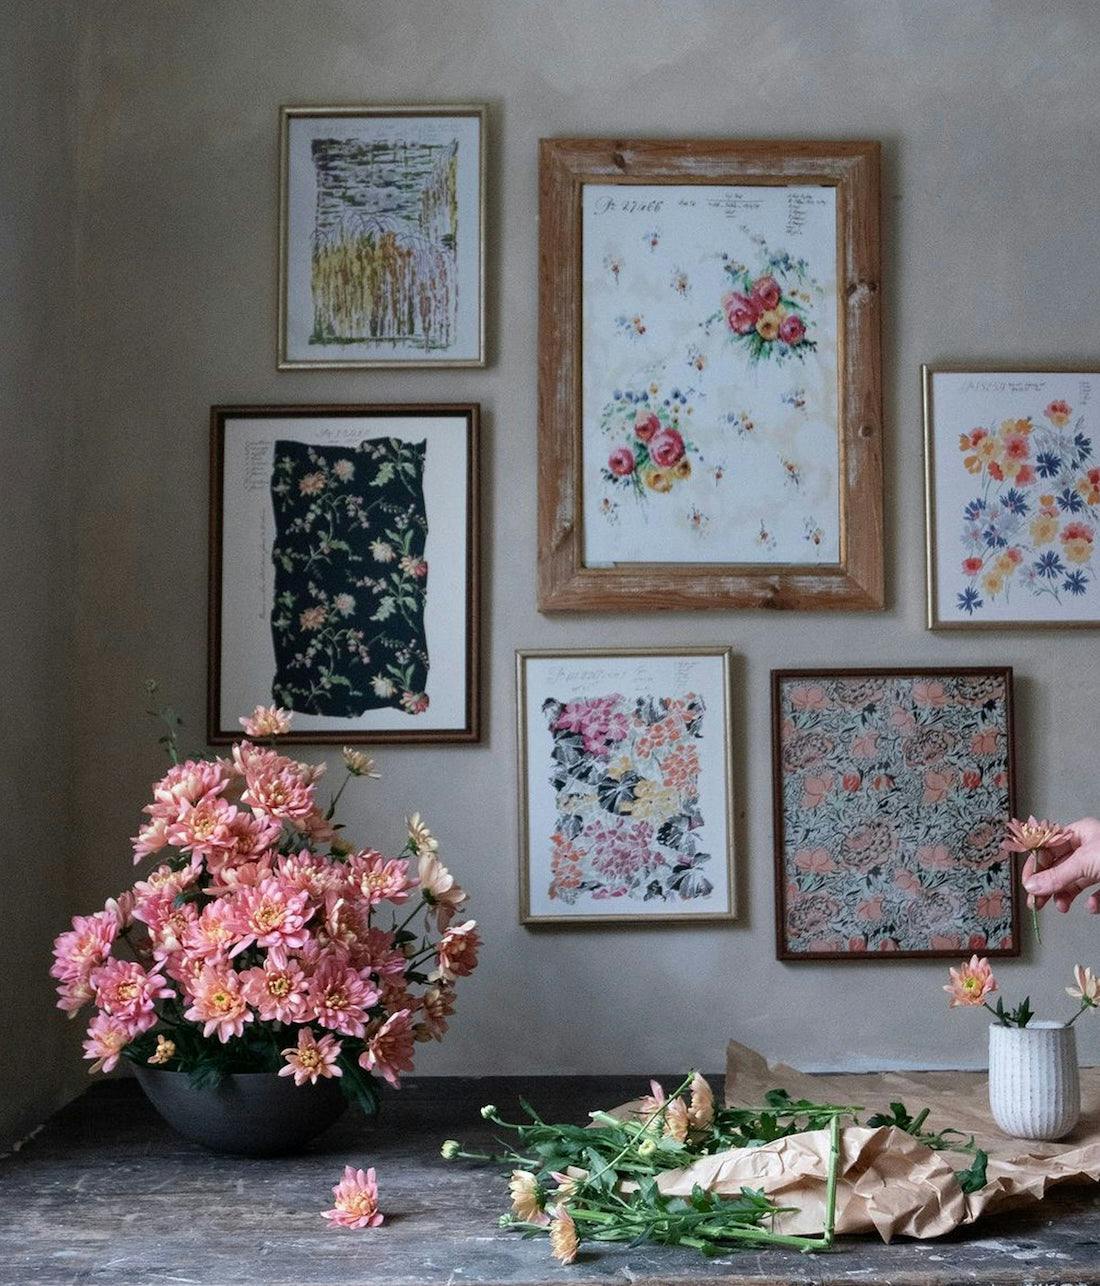 Discover Print Sisters on Collagerie. Explore our curated collection of hand painted artworks celebrating unique craftsmanship. Floral, vintage prints. Fast UK Delivery | Collagerie.com